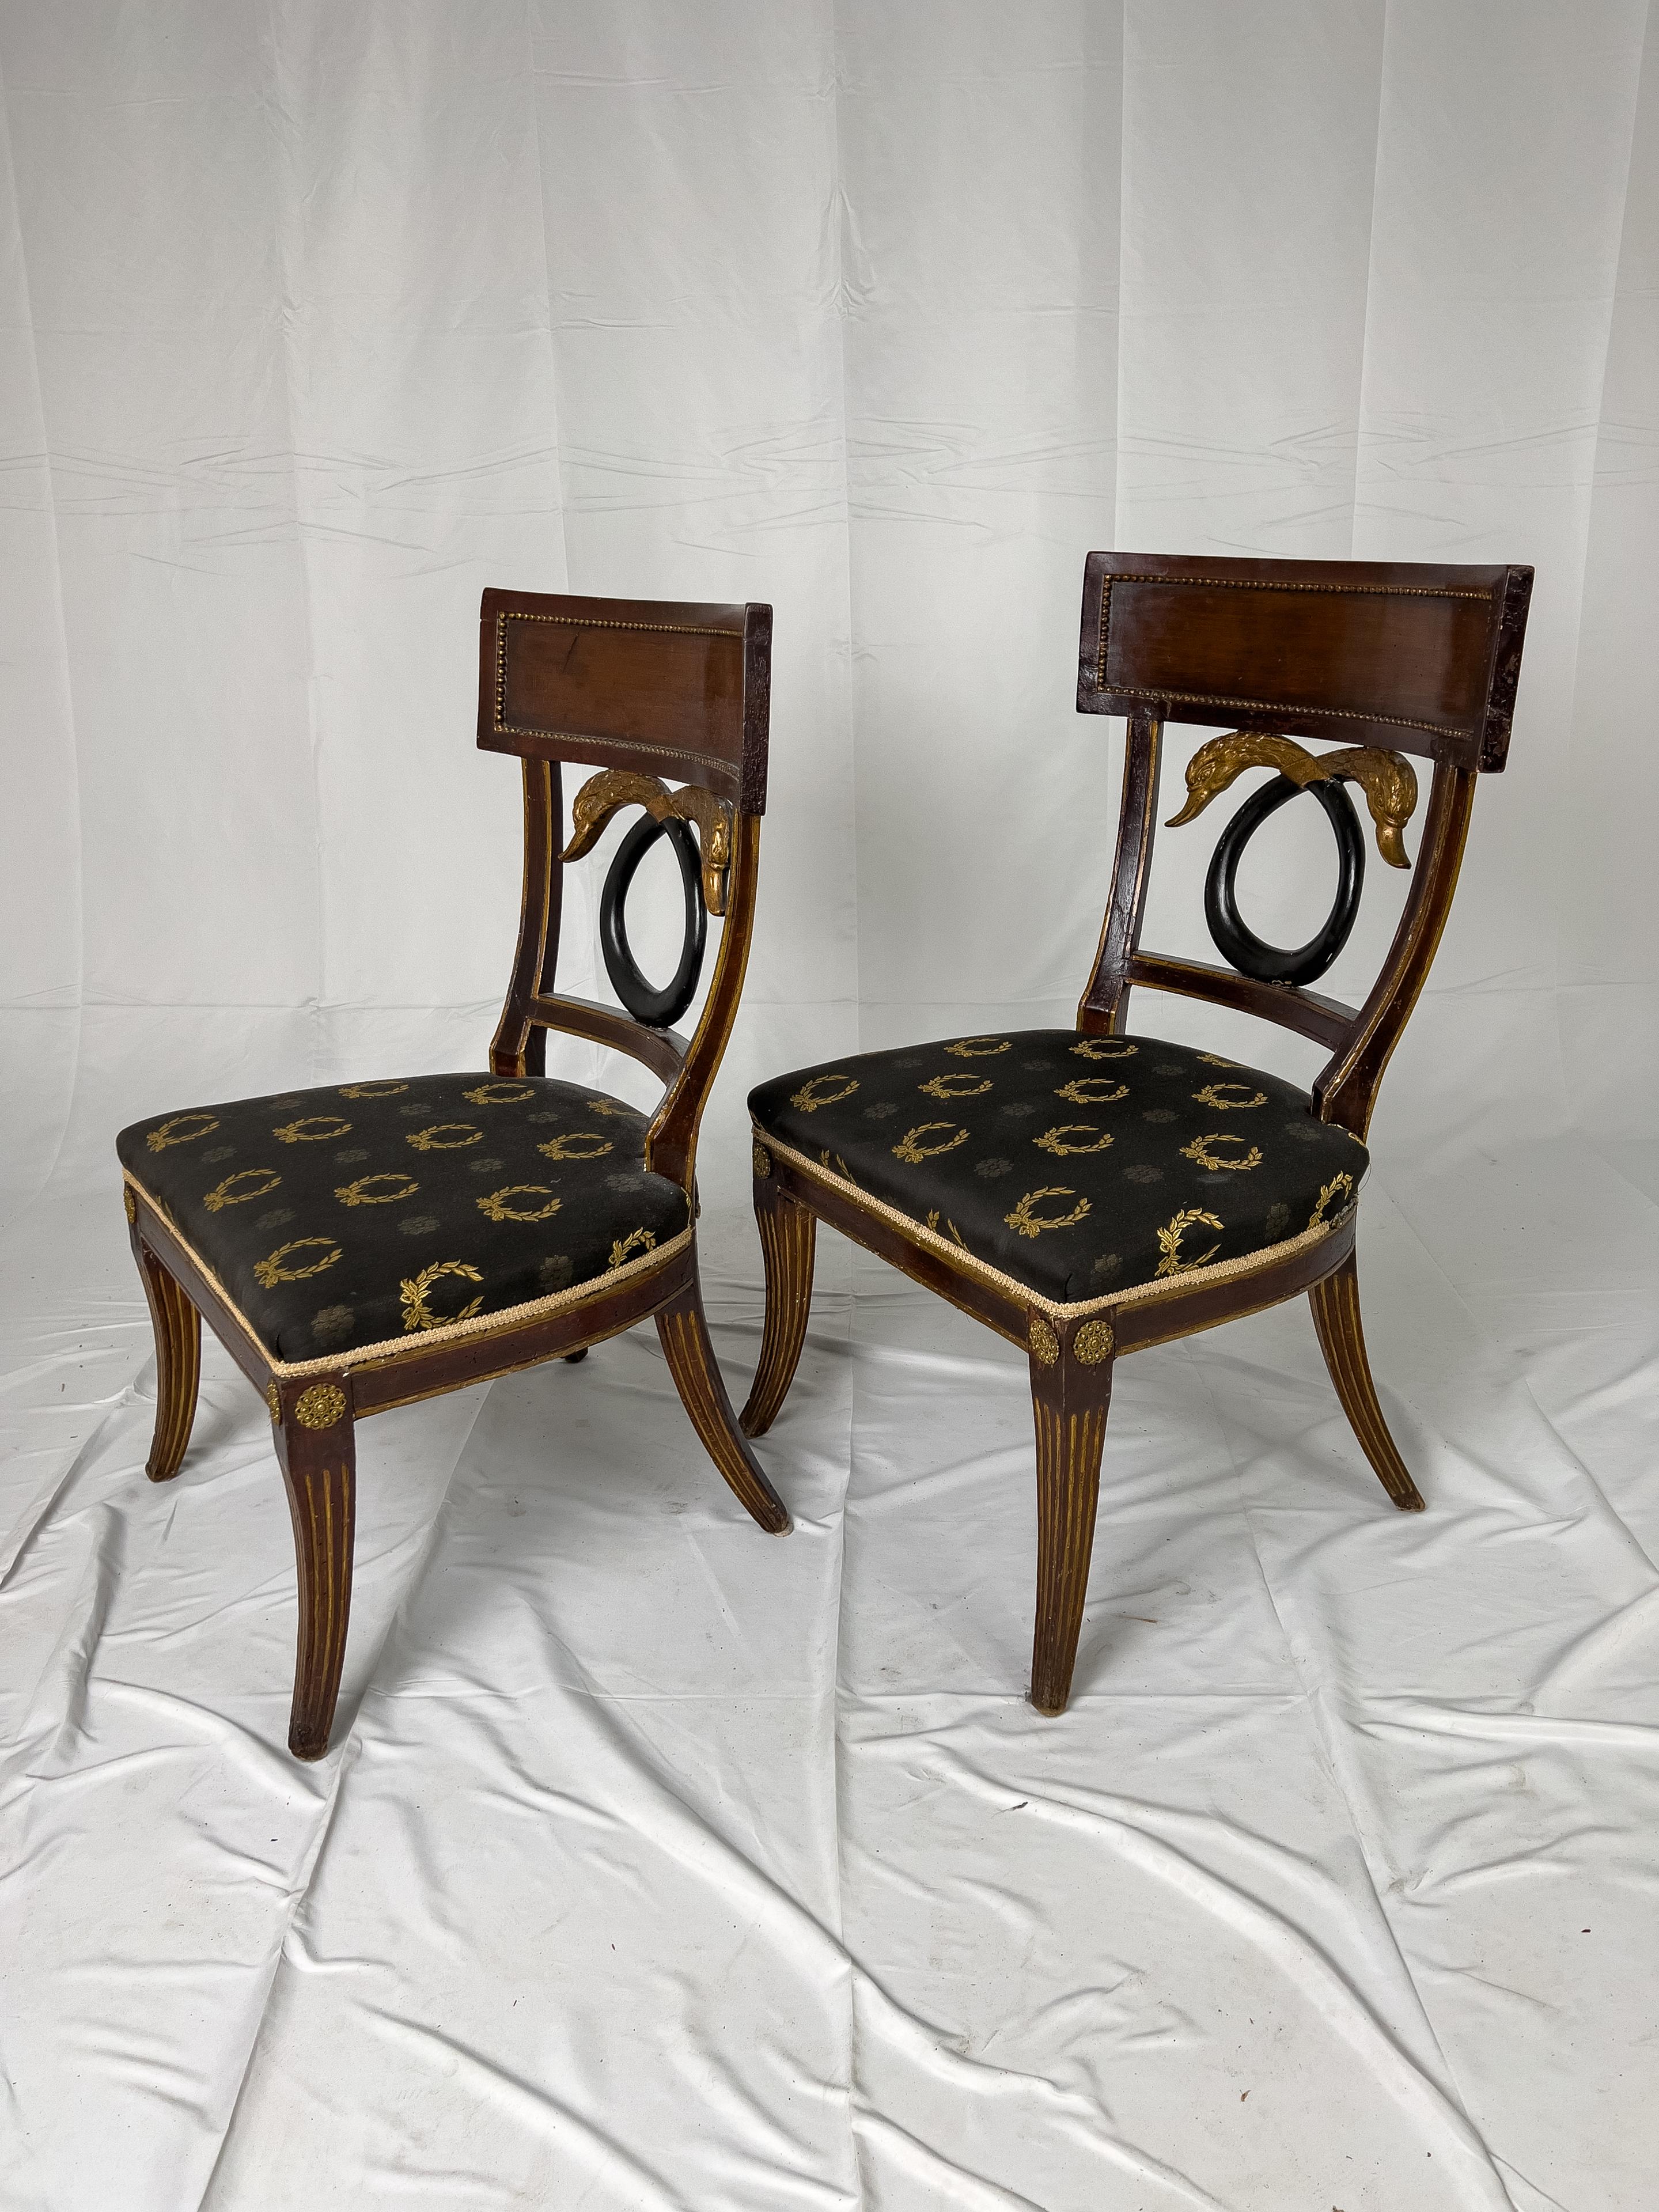 18th century Russian Empire style side chairs. The beaded block paneled crest rail is supported by ebonized and gilded double swan heads. The fluted front legs are surmounted by ormolu medallions.